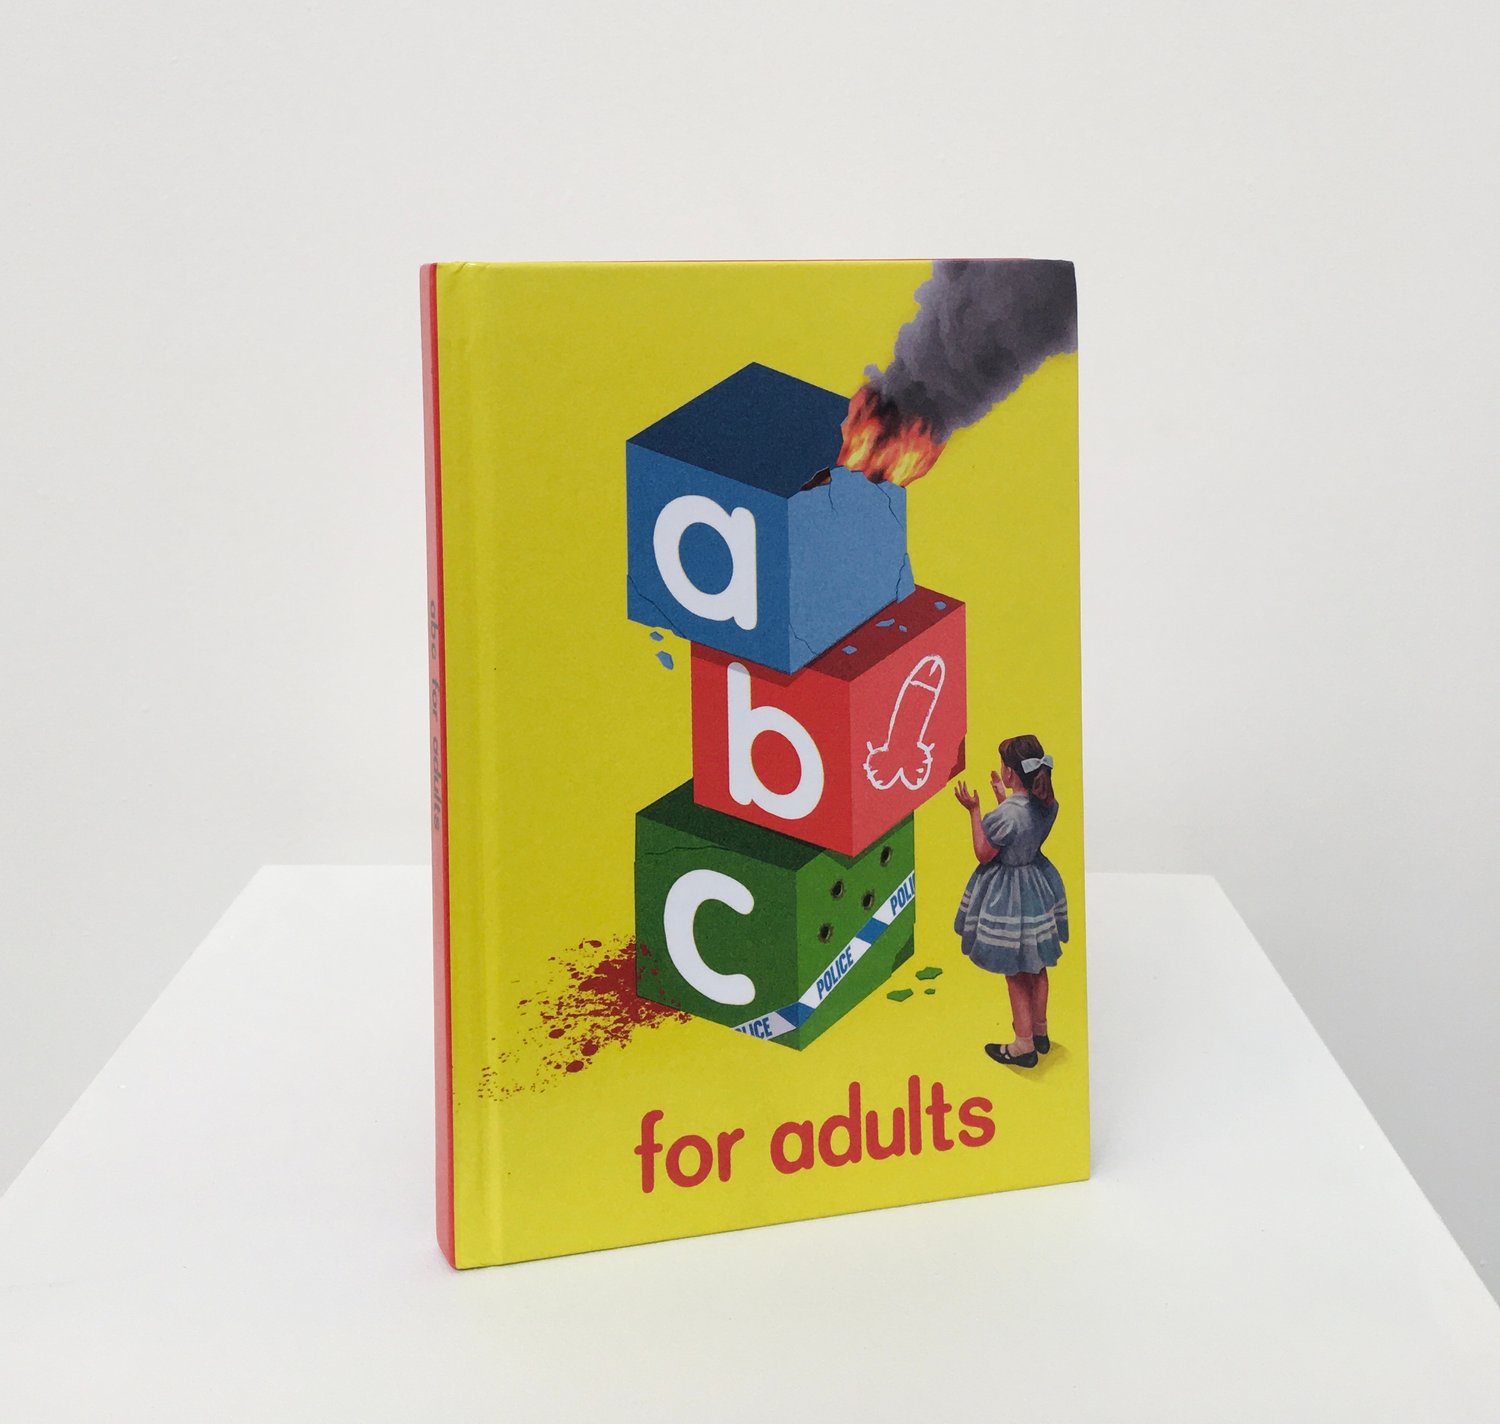 Toby Leigh - "ABC for adults"